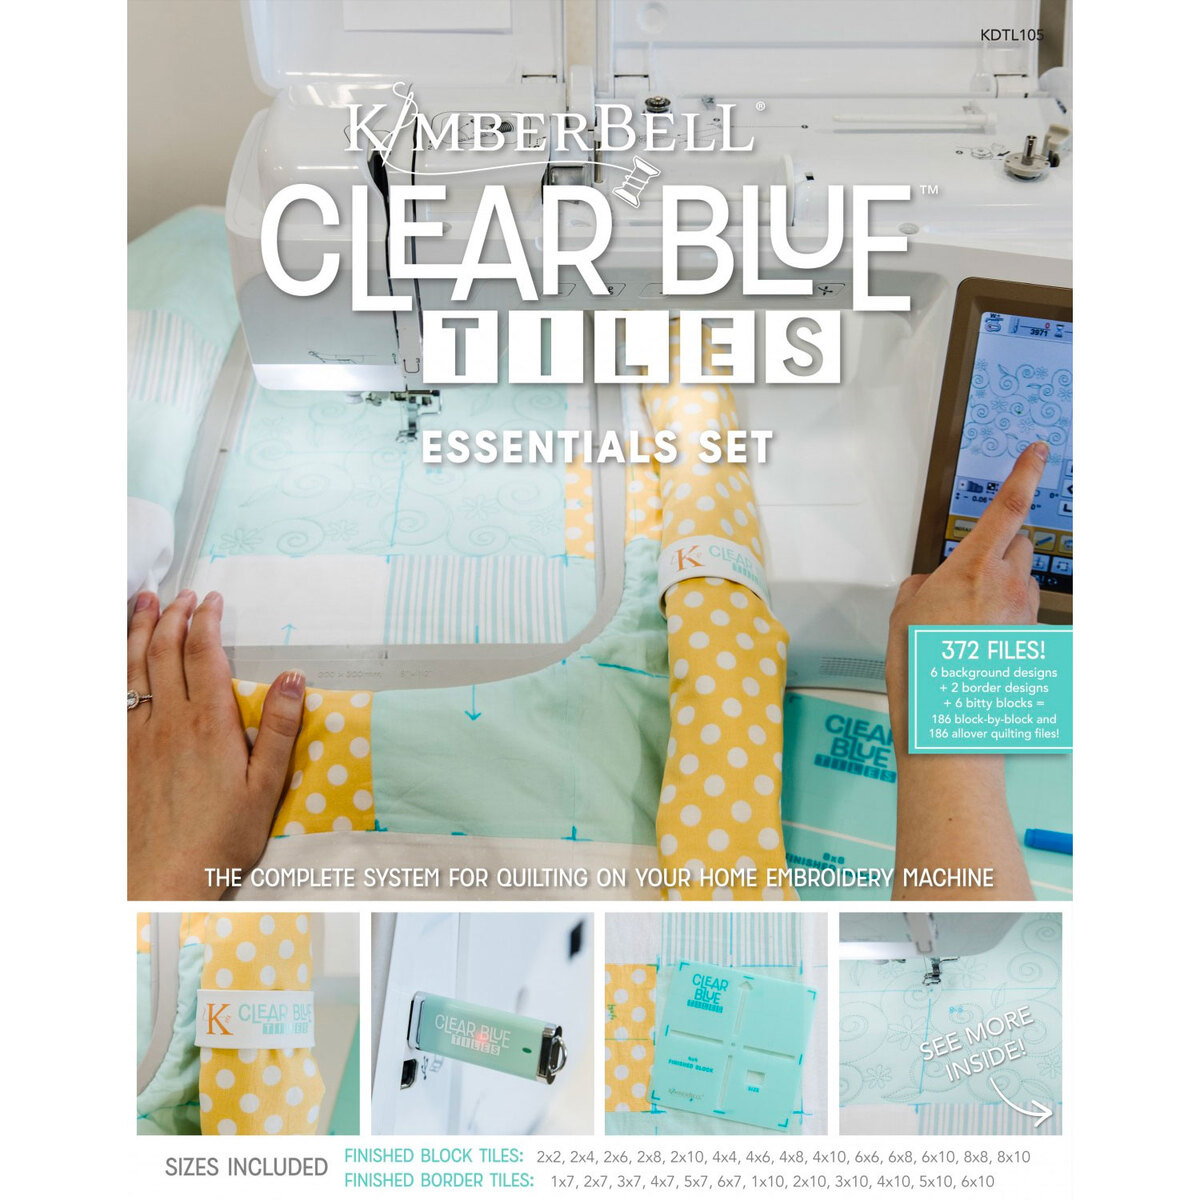 Clear Blue Tiles Essentials Set by Kimberbell